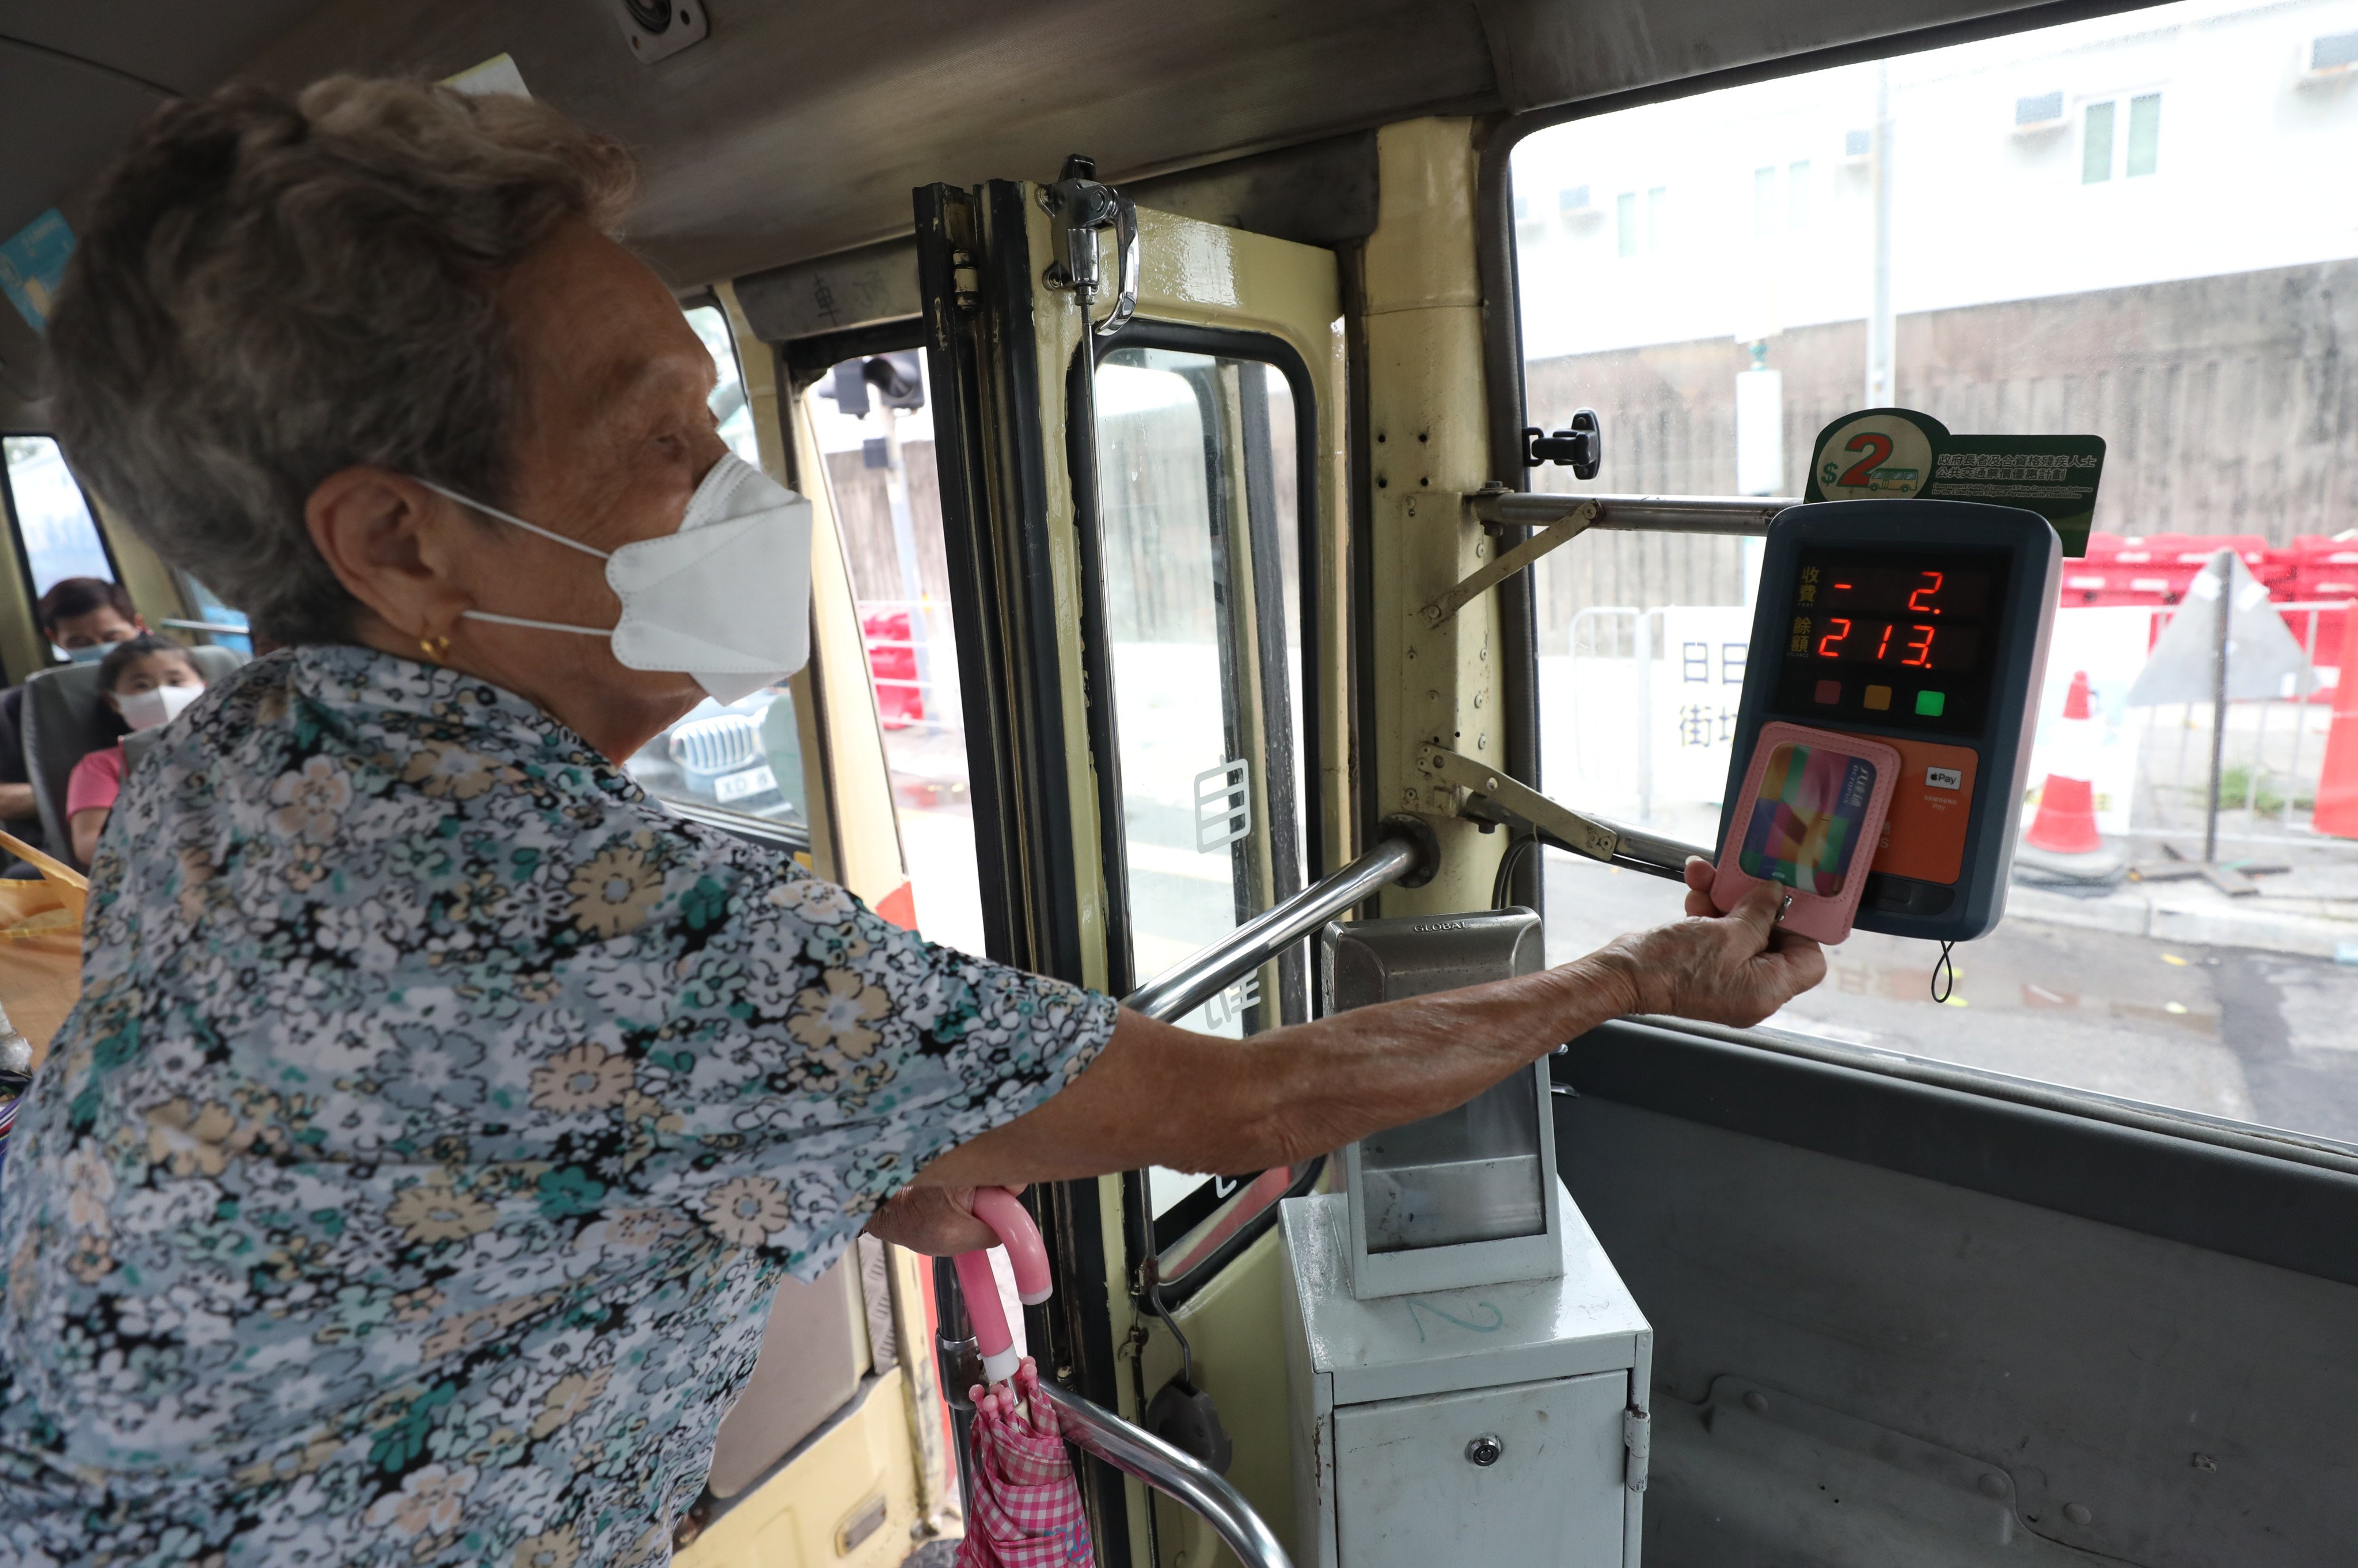 An elderly resident uses an Octopus card to pay a minibus fare. Photo: Xiaomei Chen